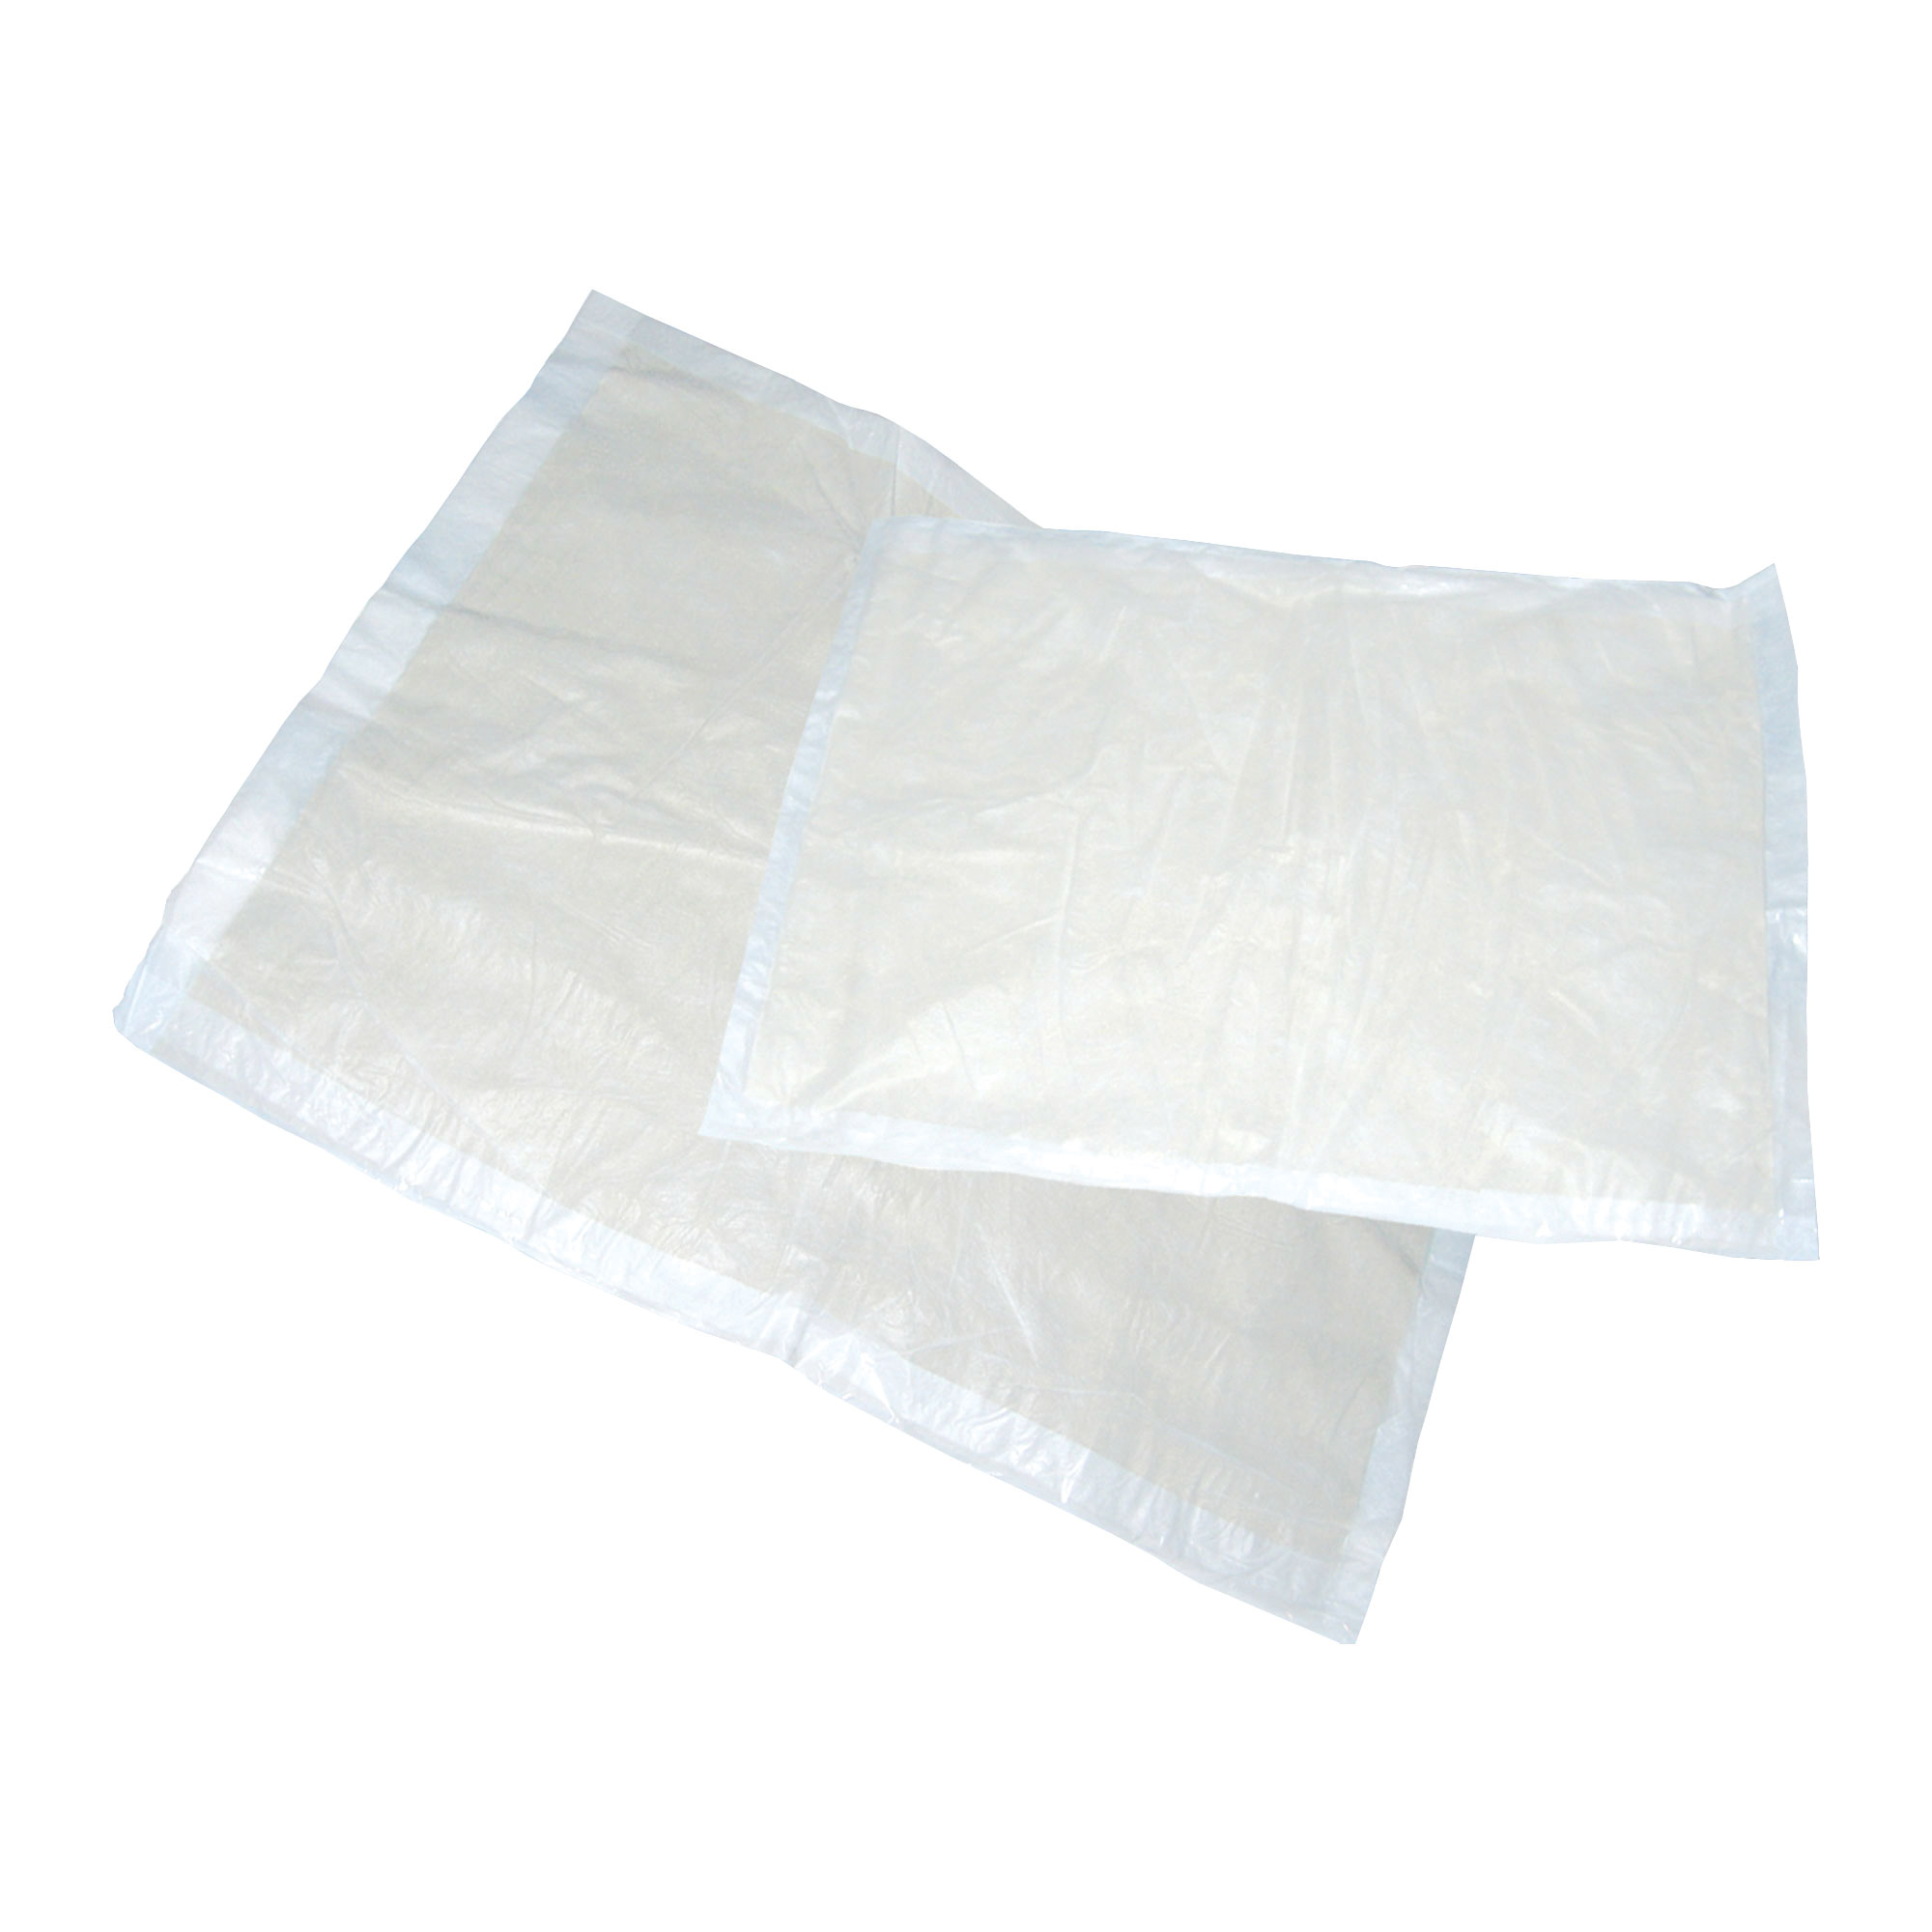 Primacare 5 Ply Disposable Bed Pads - 57 x 75cm